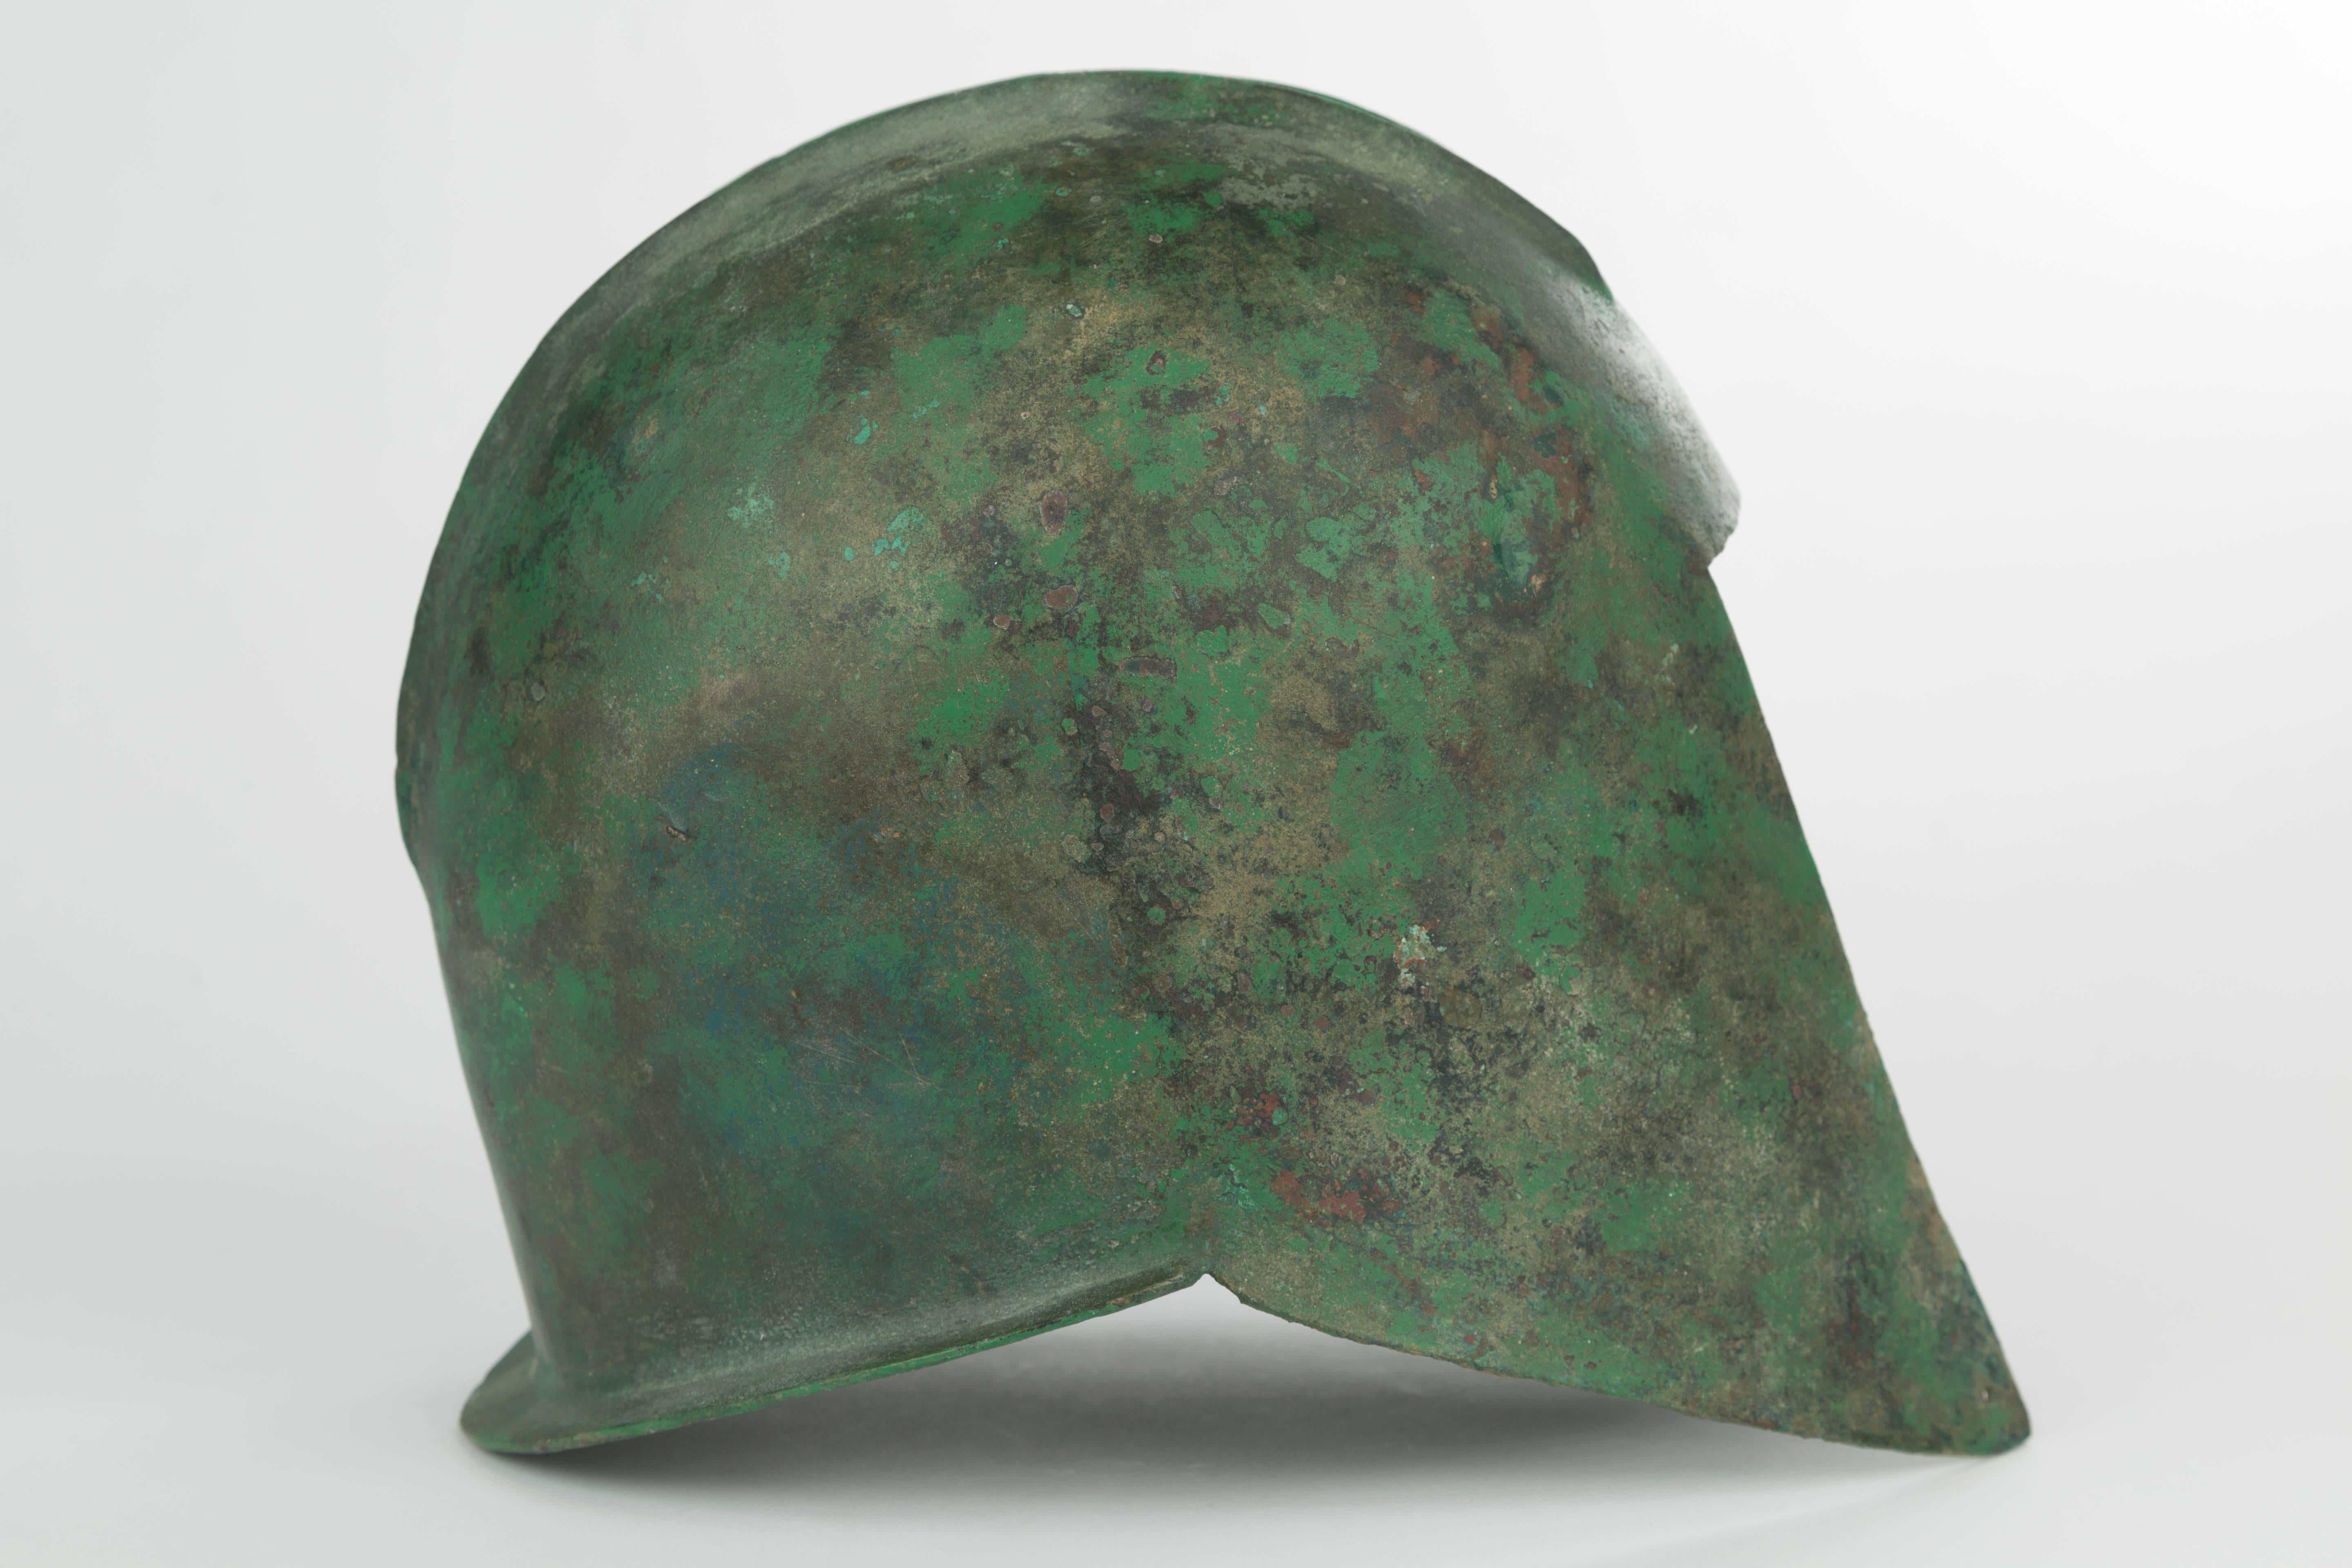 Greek bronze Illyrian Helmet
Archaic period, circa 500-500 BC.
Hammered from sheet-bronze, of domed form, with two parallel ribs to the bowl, a straight visor, two raised parallel ridges running front to back across the crown, and a narrow flange